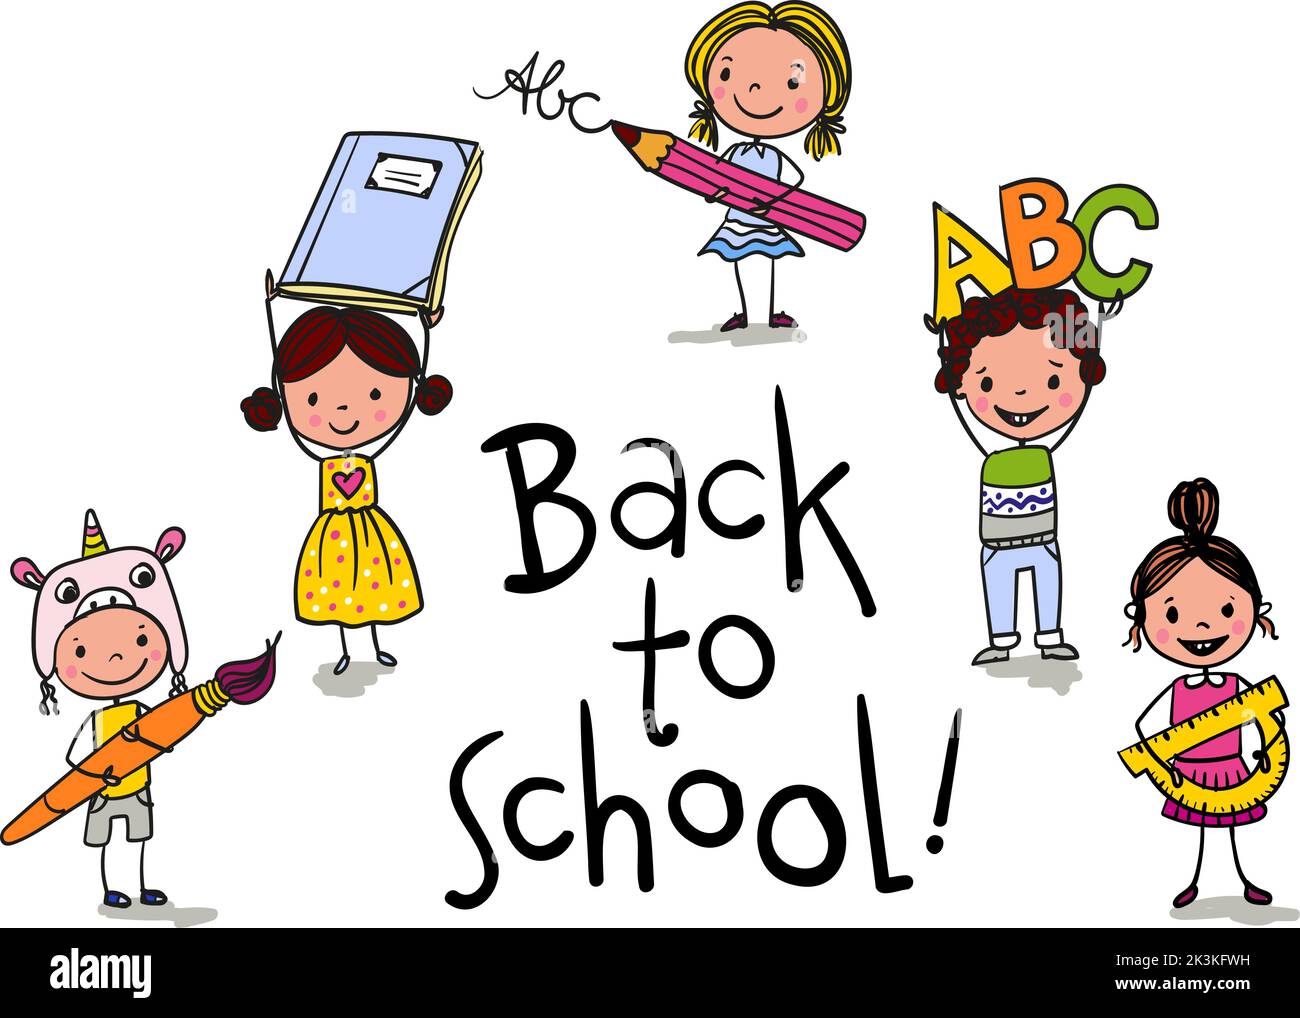 Children welcome Cut Out Stock Images & Pictures - Page 2 - Alamy